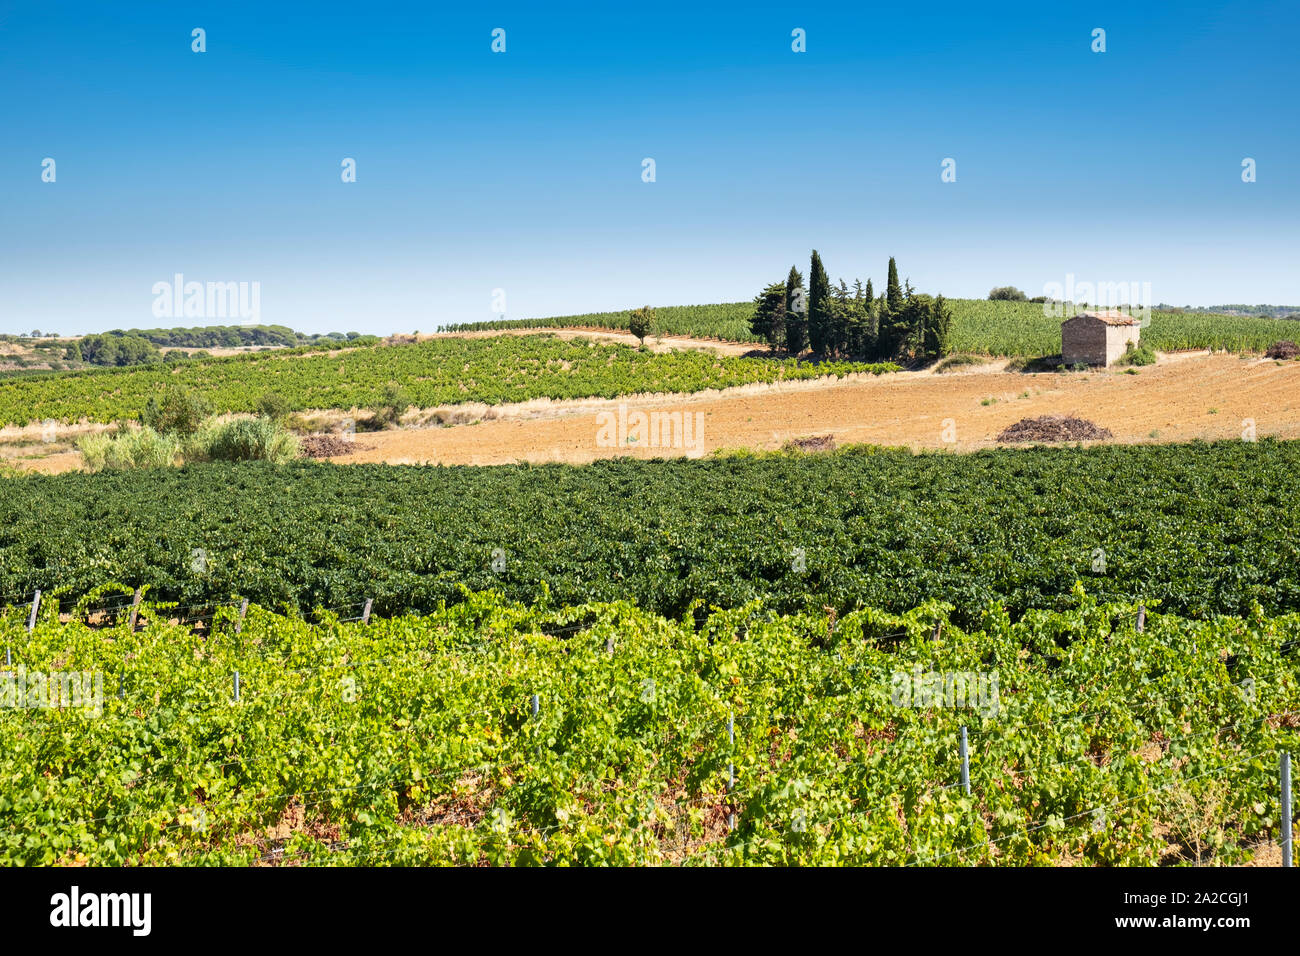 Languedoc countryside in summer, vineyard stretching out over the horizon. Stock Photo